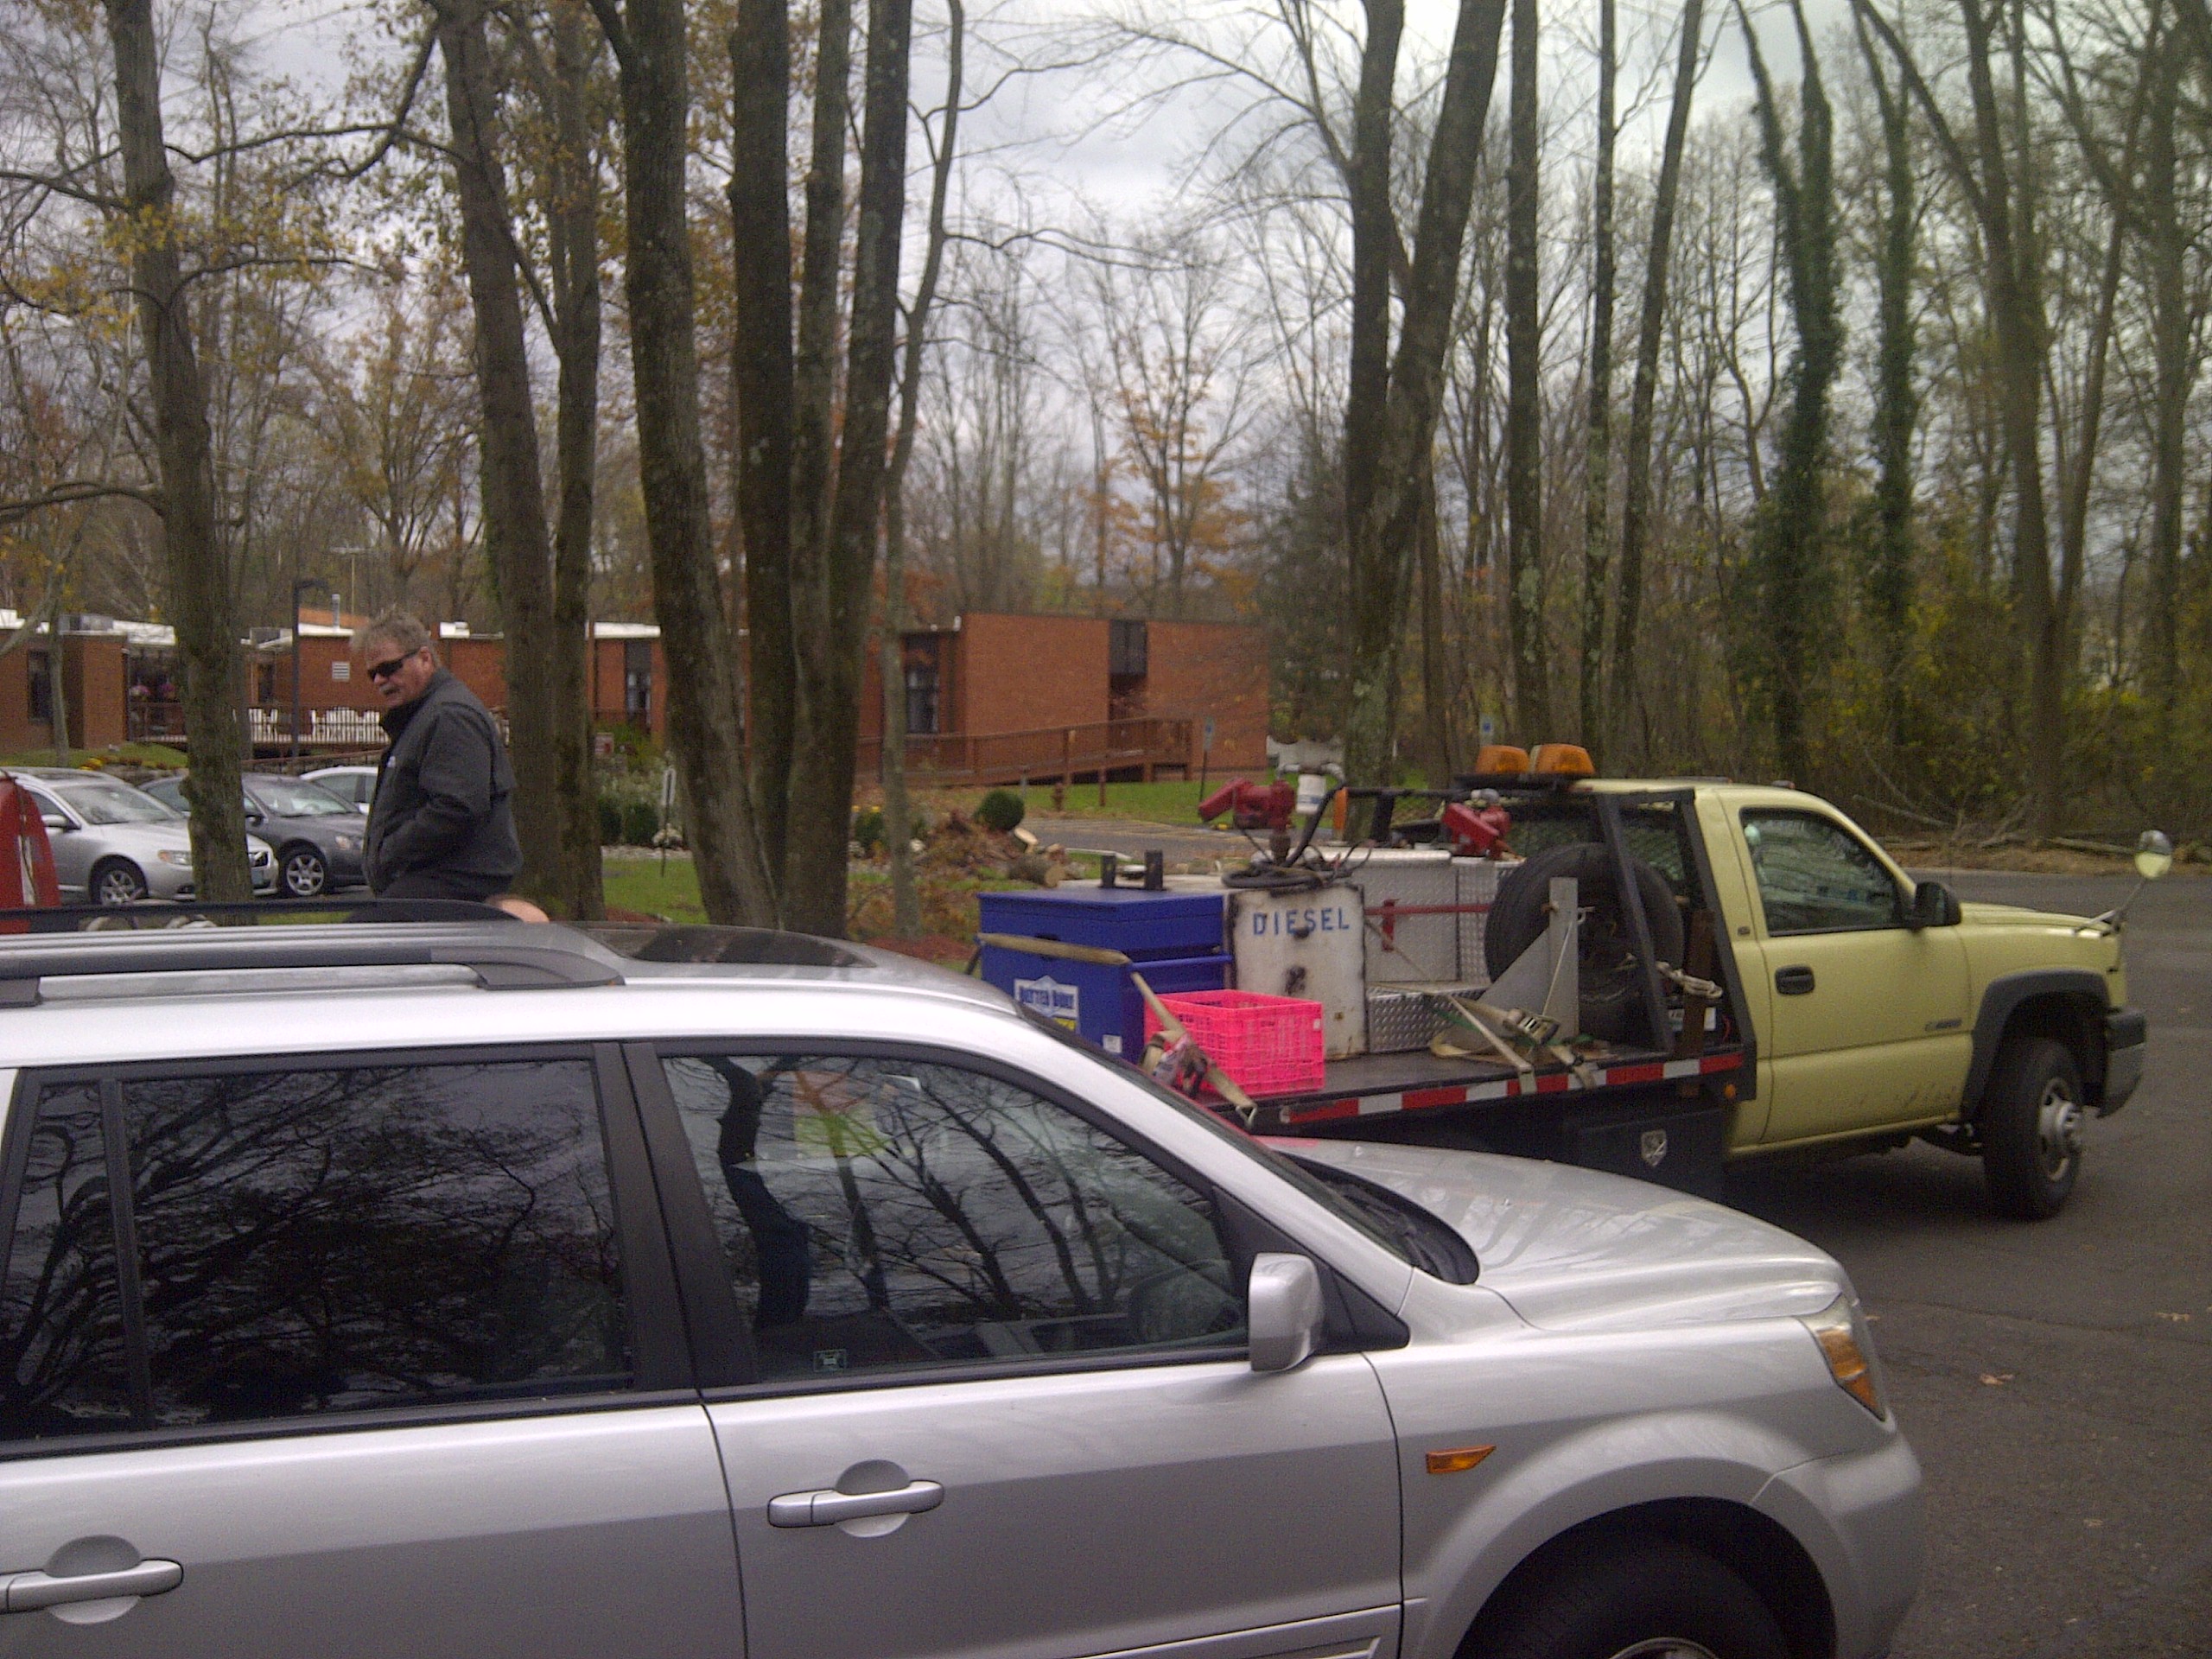 HCR Manor care employees getting fuel rasions during Hurricane Sandy